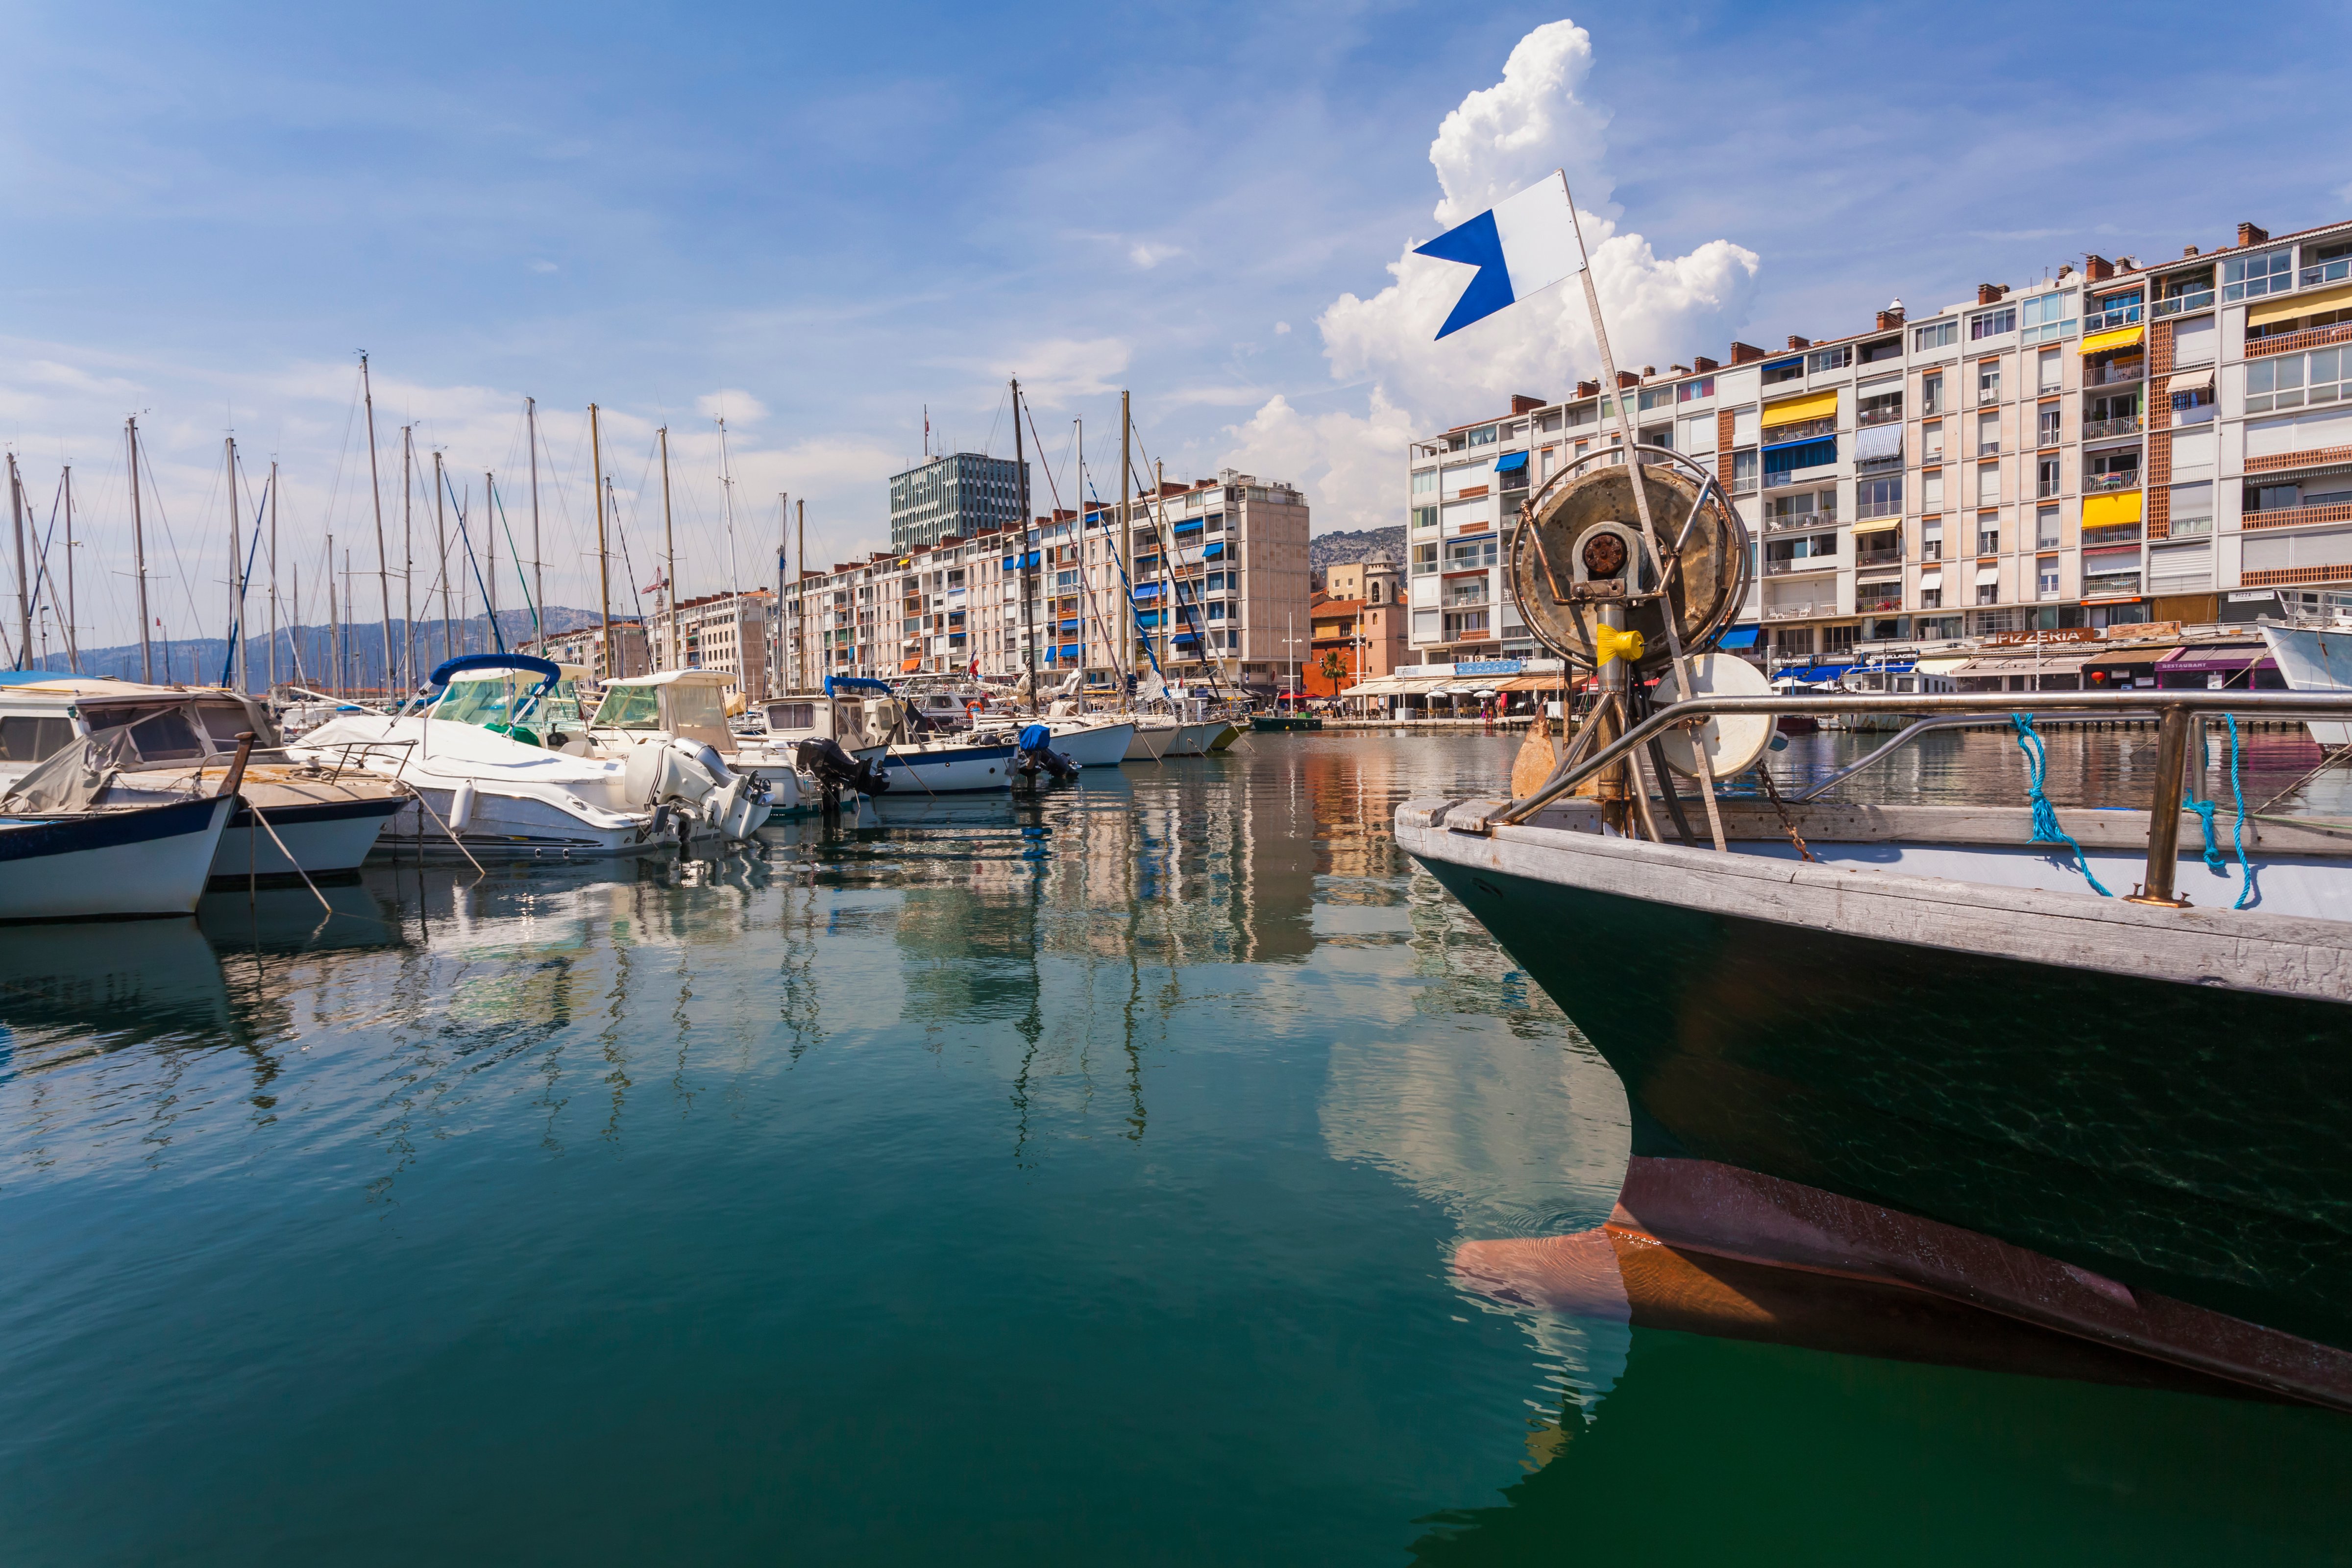 The harbor of Toulon (Getty Images)